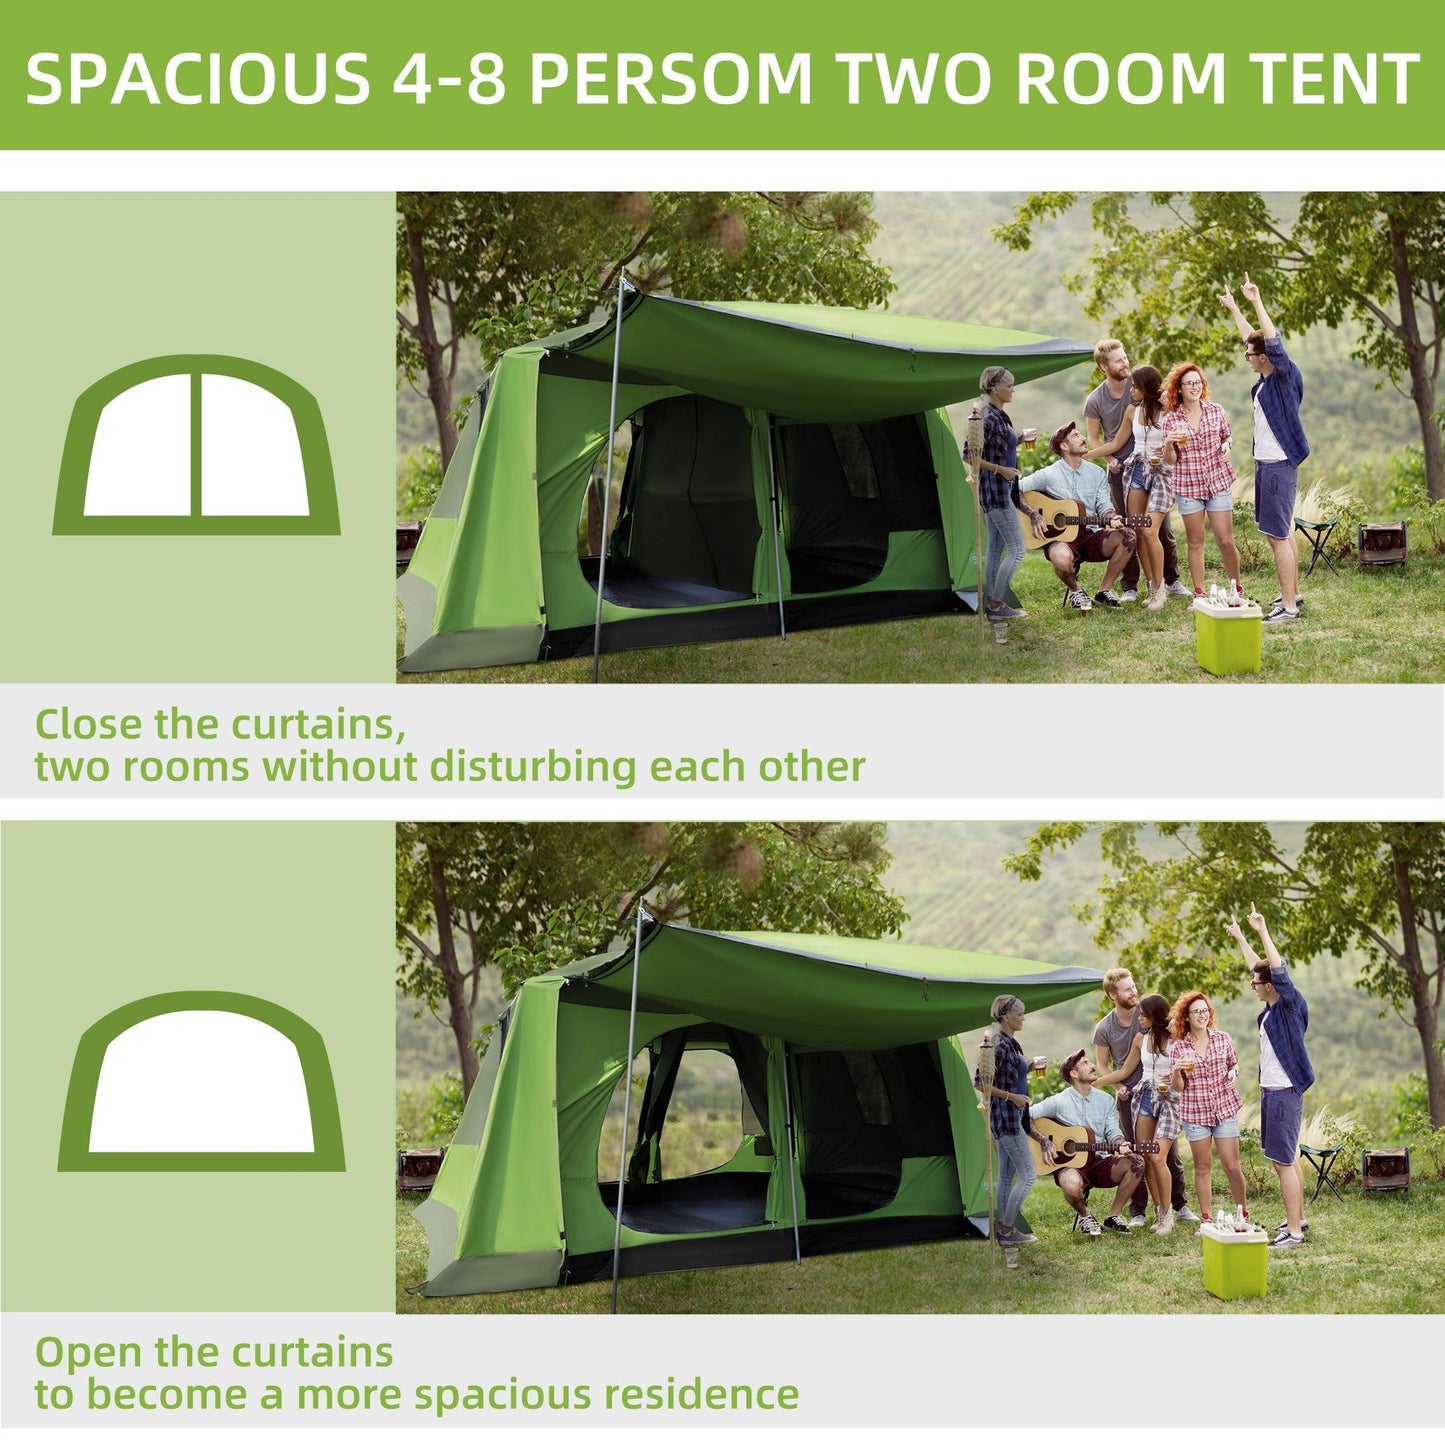 Outsunny Dome Tent: 4-8 Person Camping Shelter - ALL4U RETAILER LTD